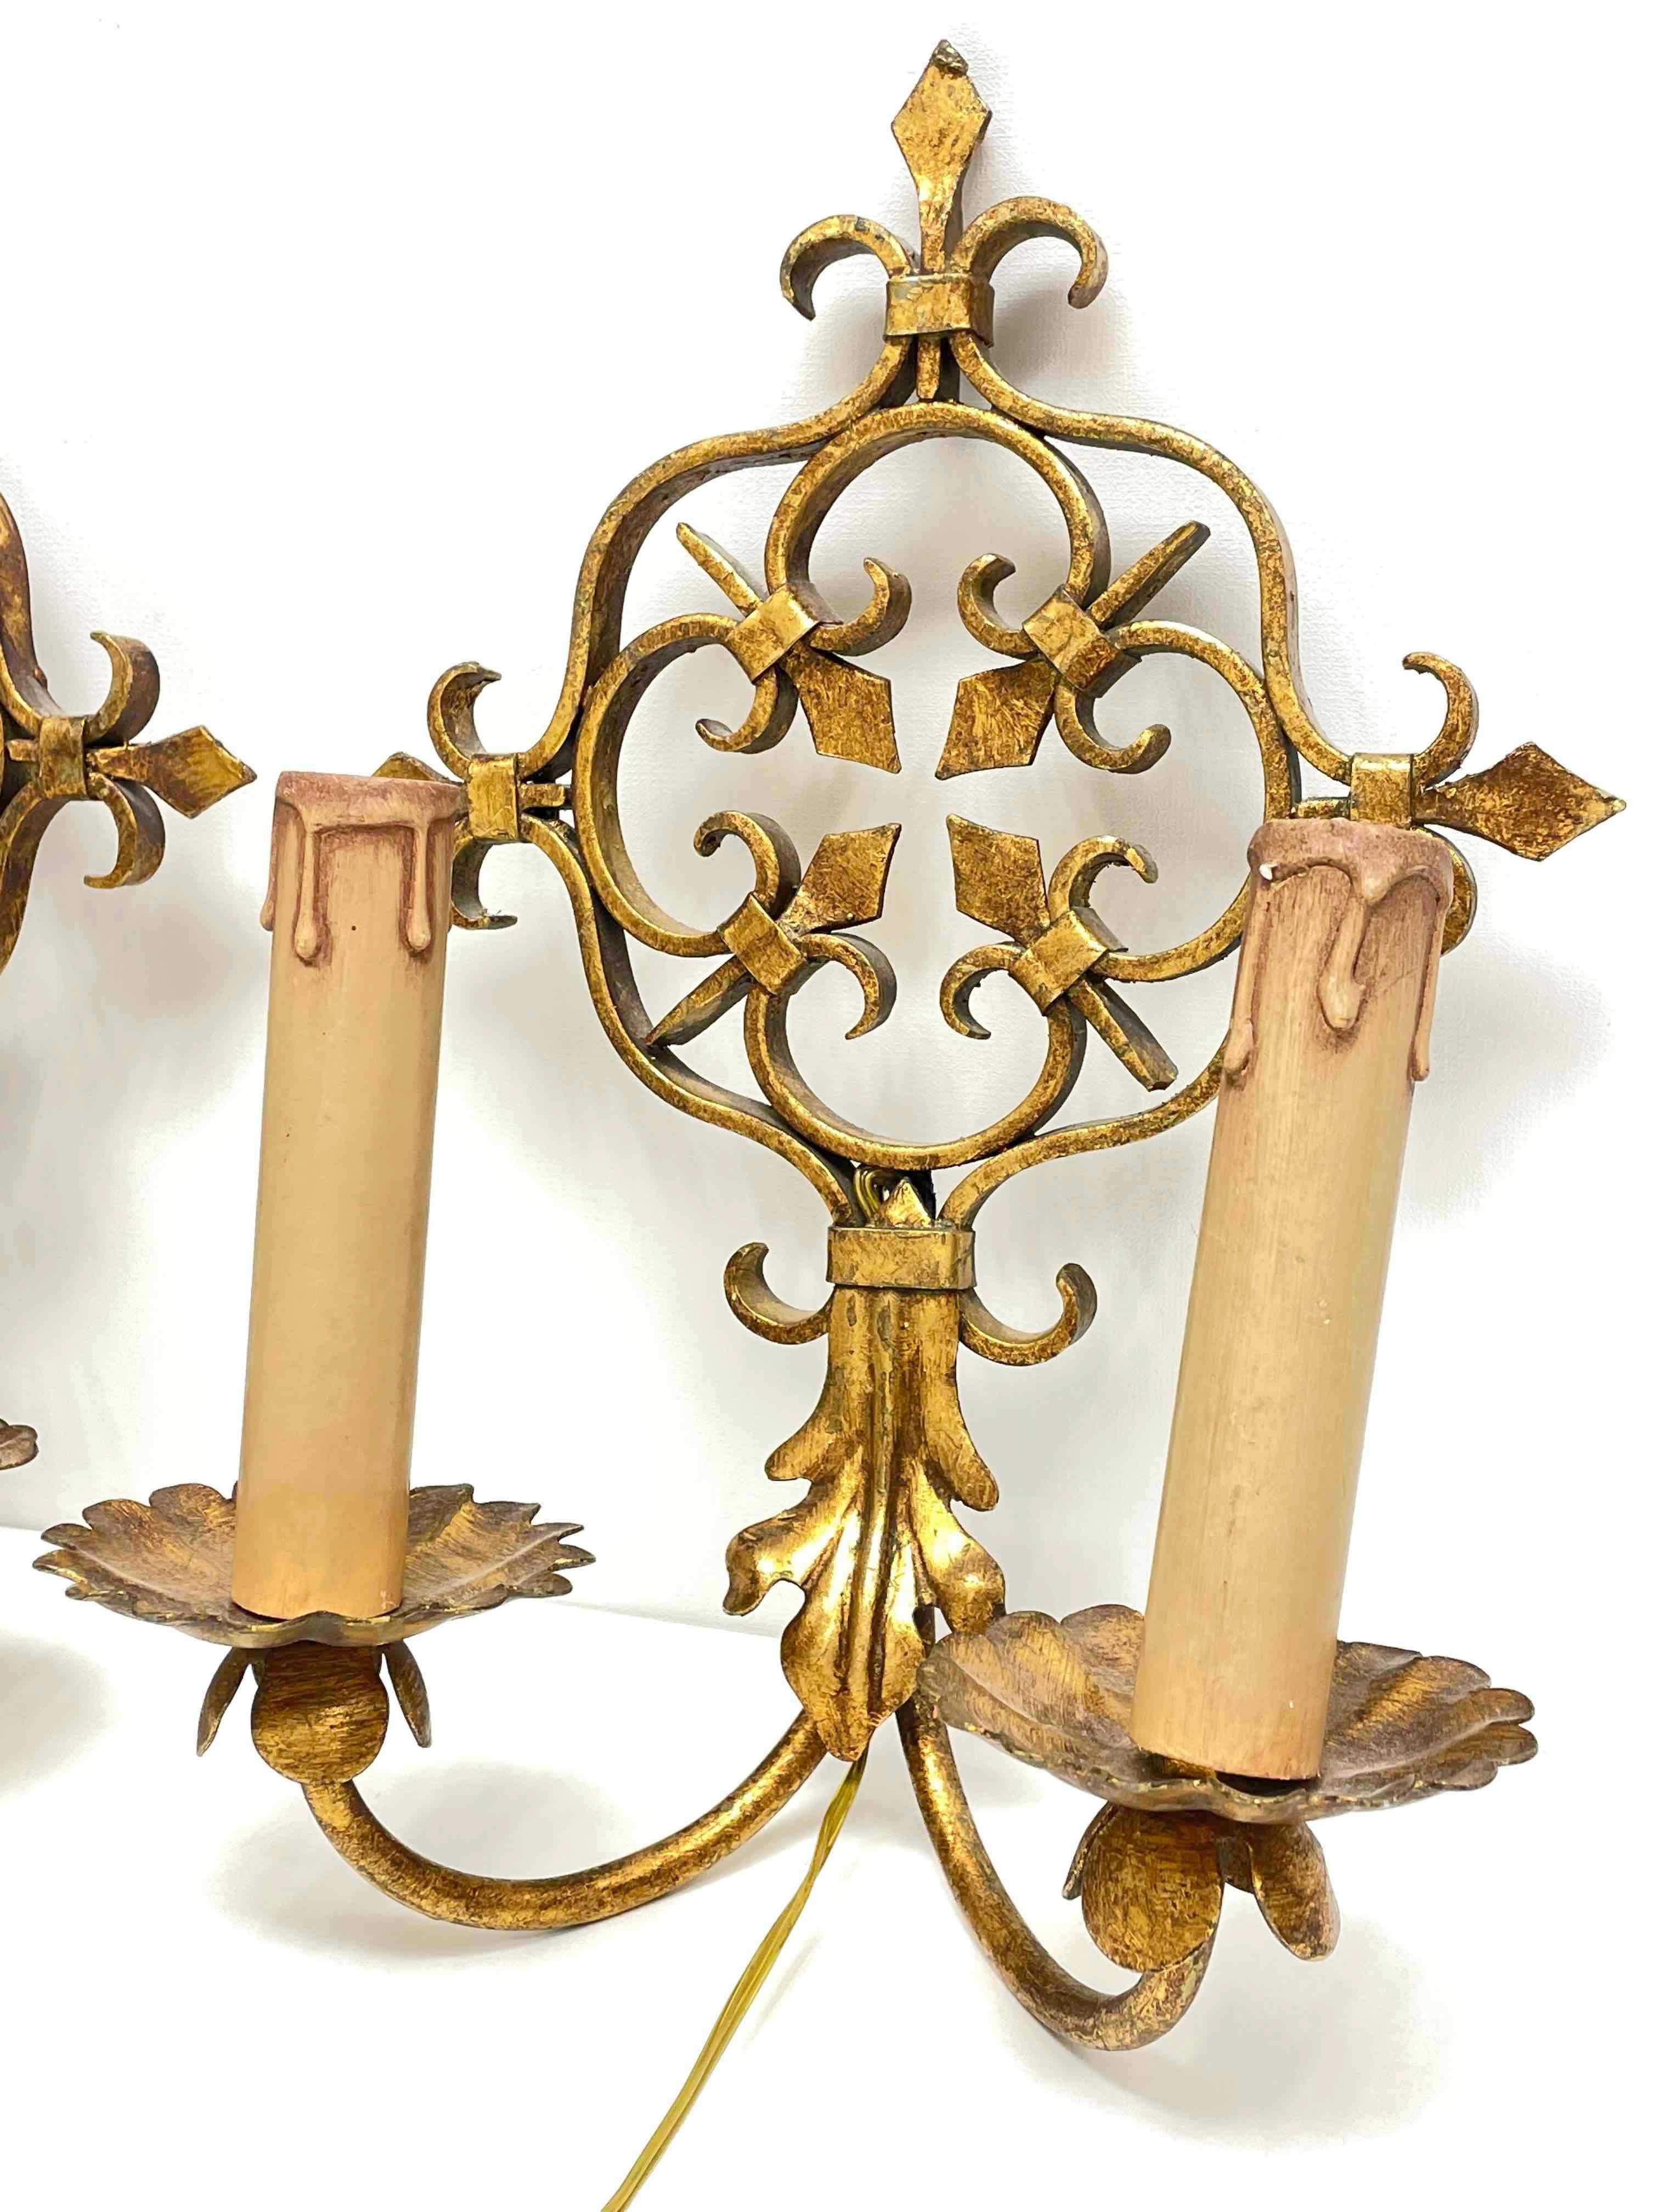 Mid-20th Century Pair of Gilt Metal Tole Toleware Sconces by Banci Firenze, Italy, 1960s For Sale